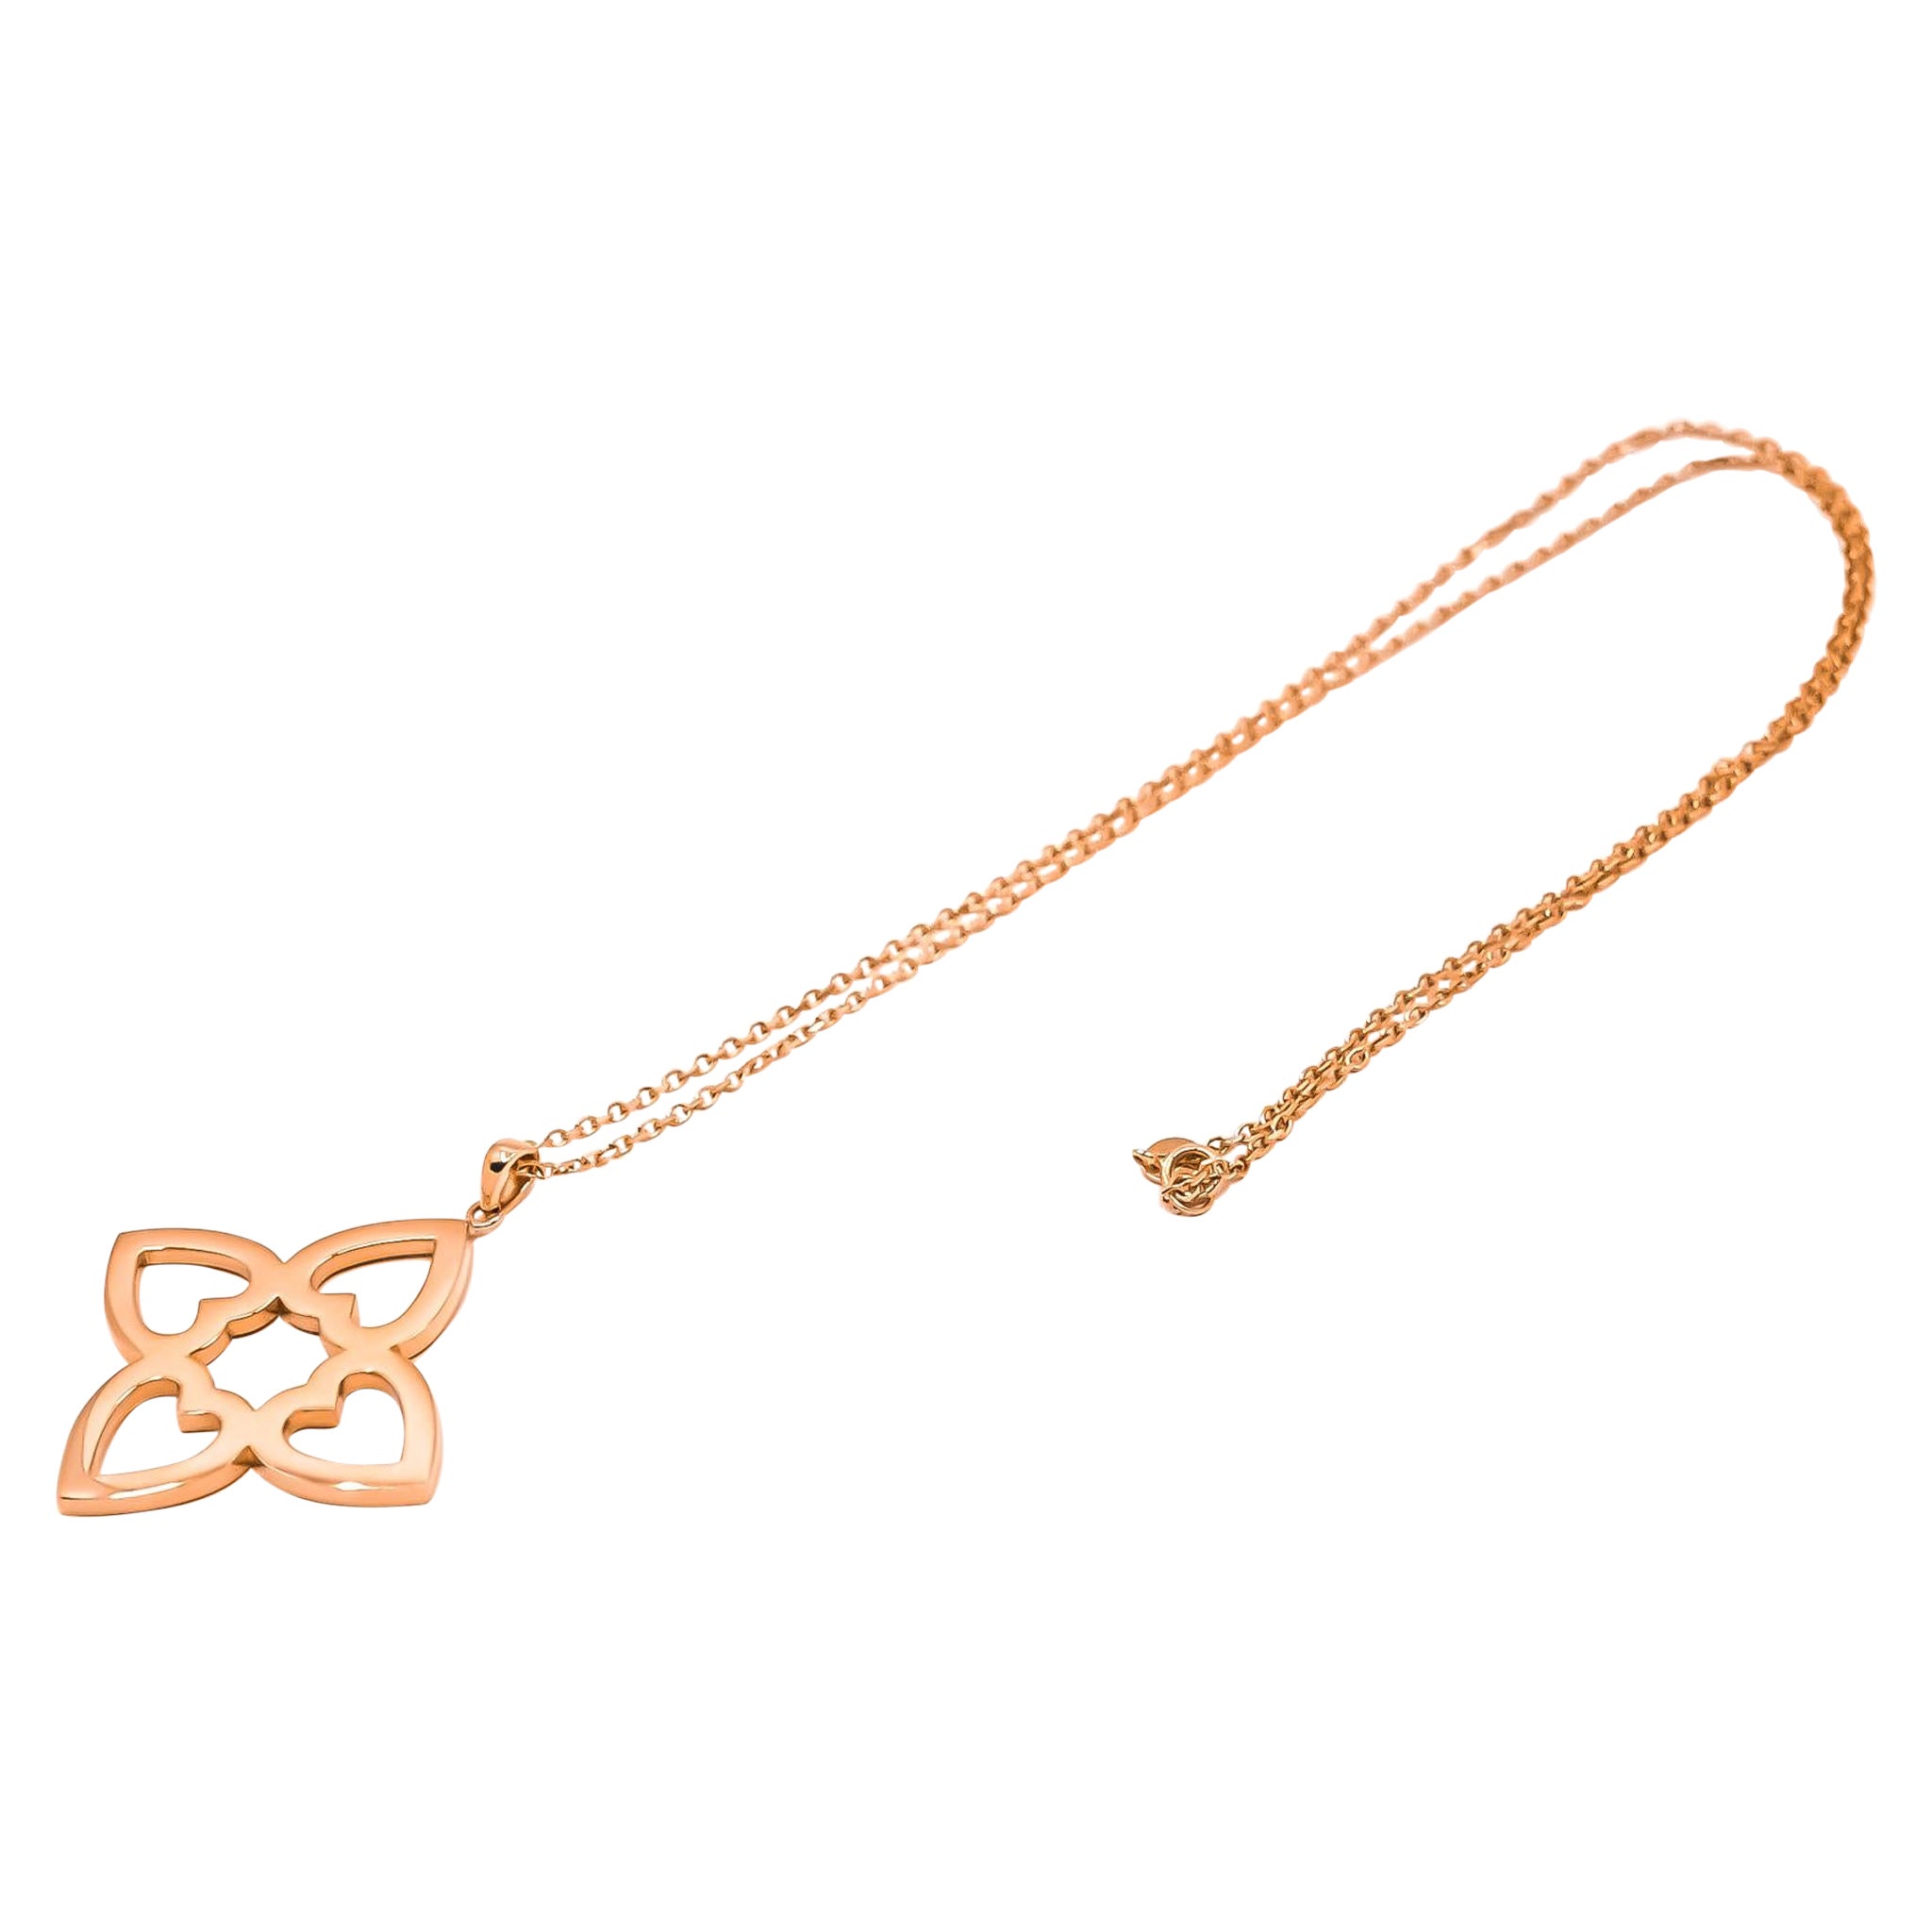 Connected Hearts Pendant Necklace in 18kt Rose Gold